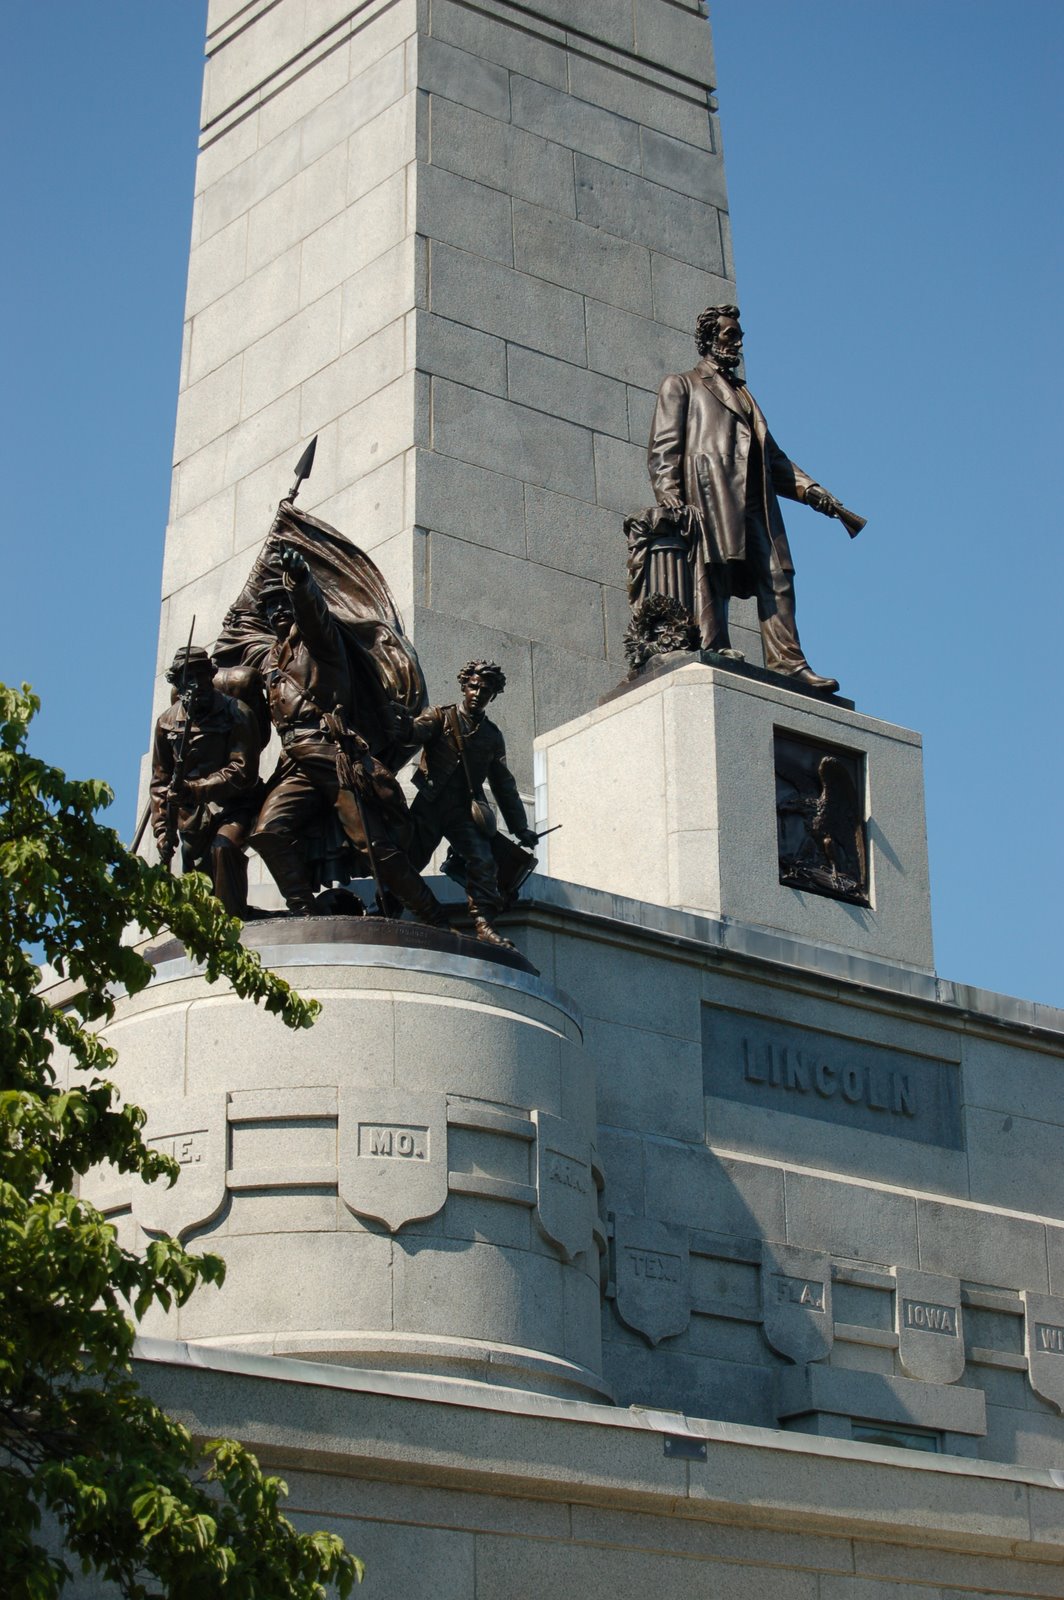 One corner of Lincoln's tomb